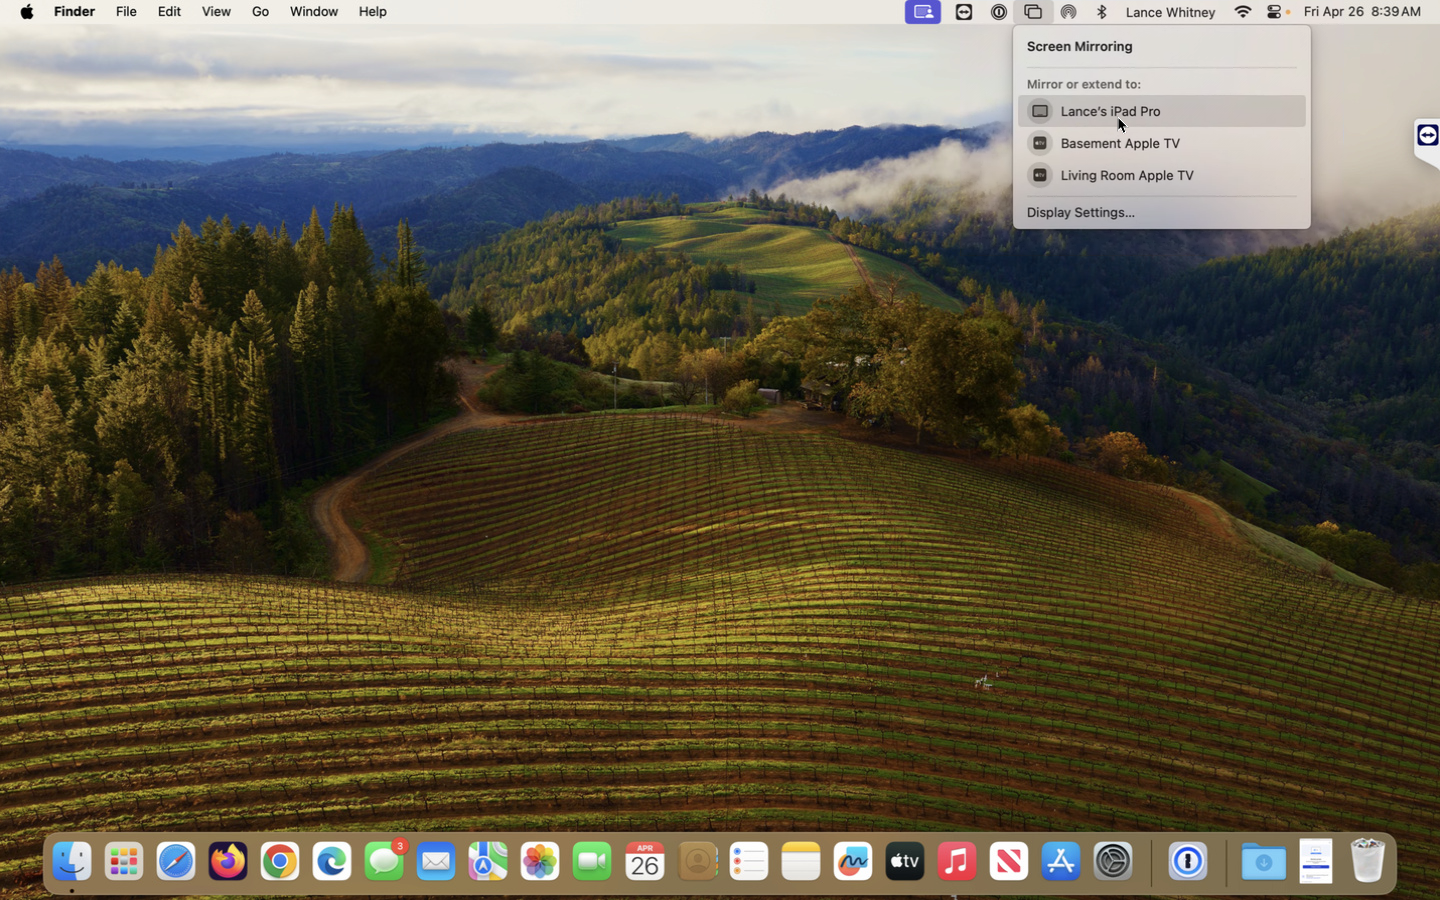 How to extend or mirror your Mac screen to an iPad with Sidecar